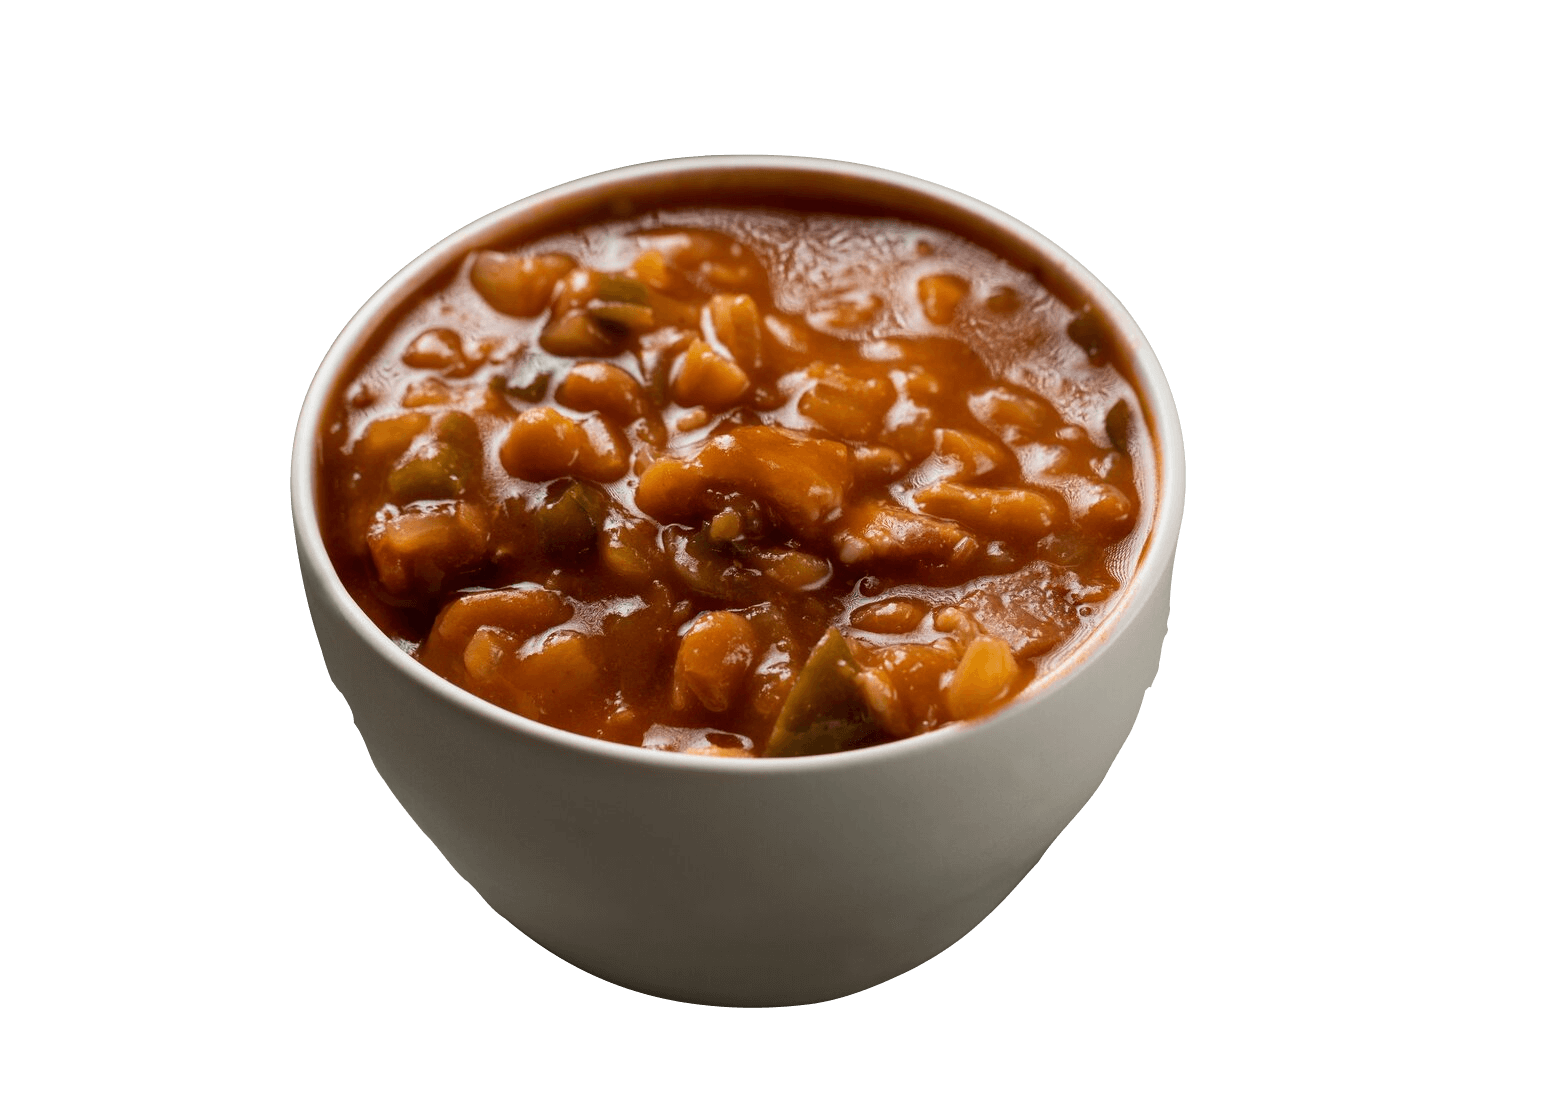 rsz_1beans_mhcbarbecue-1-edit_ccexpress